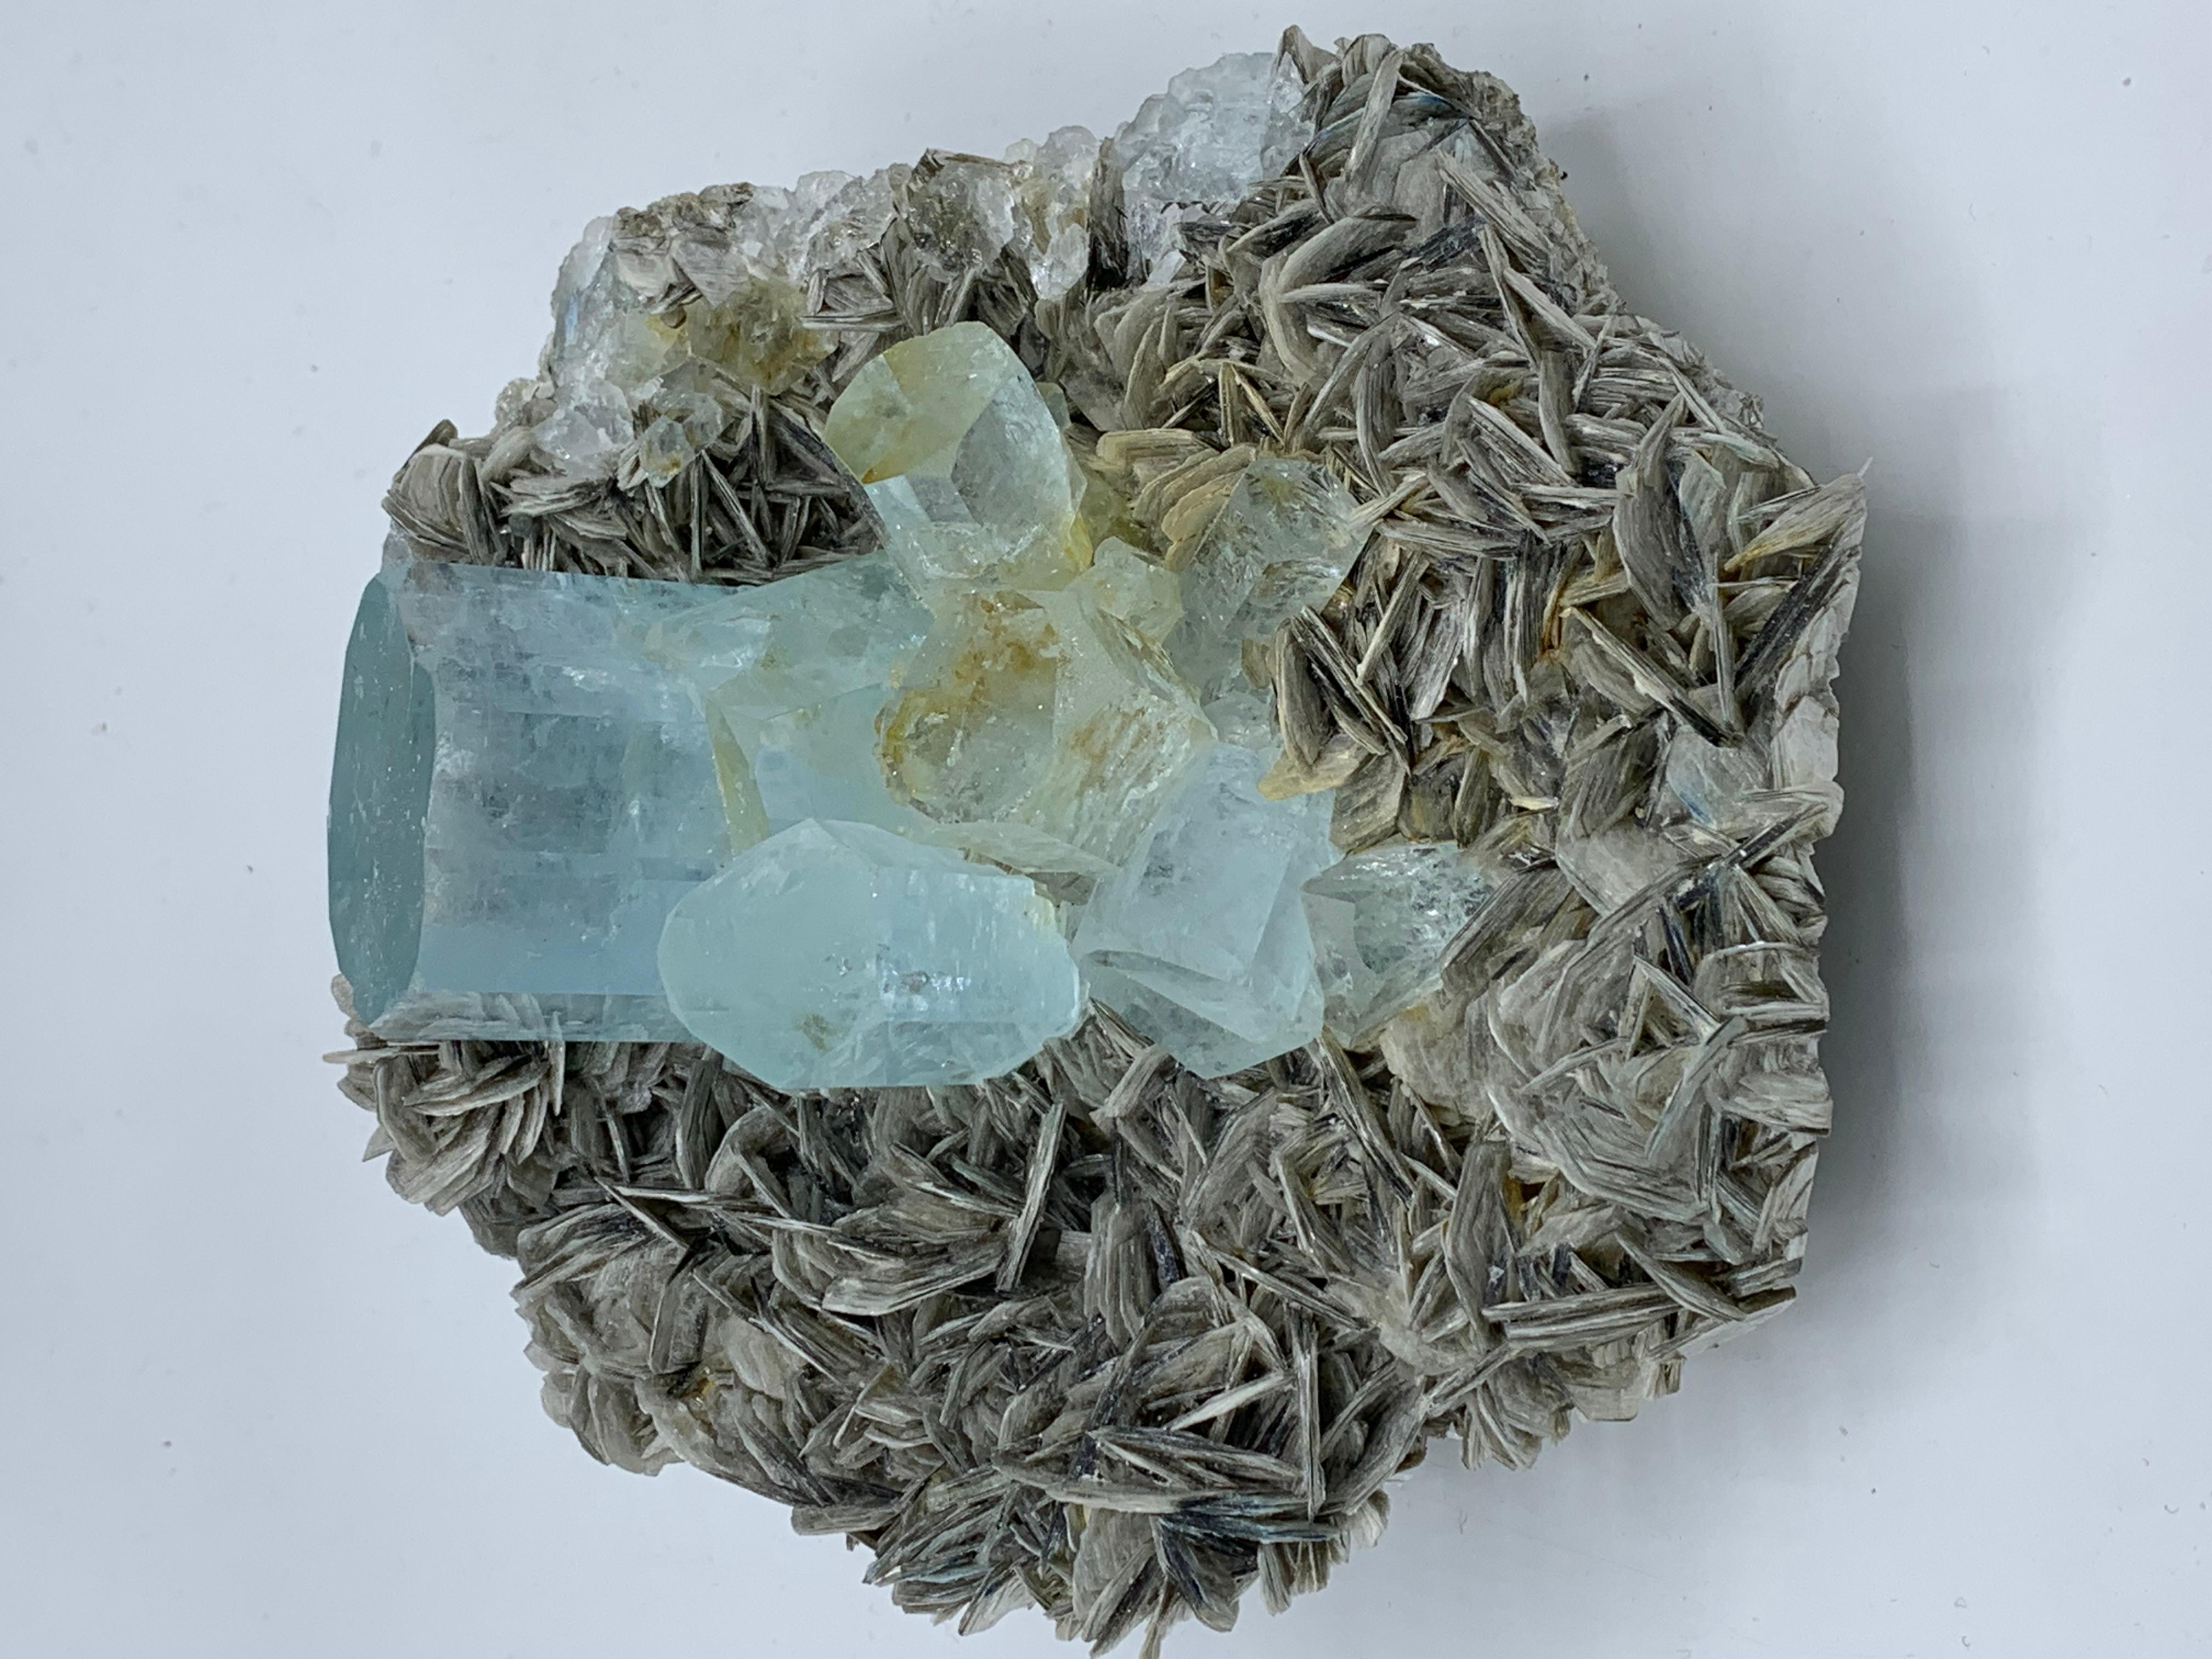 18th Century and Earlier 1989 Gram Magnificent Aquamarine Specimen With Muscovite From Nagar, Pakistan  For Sale